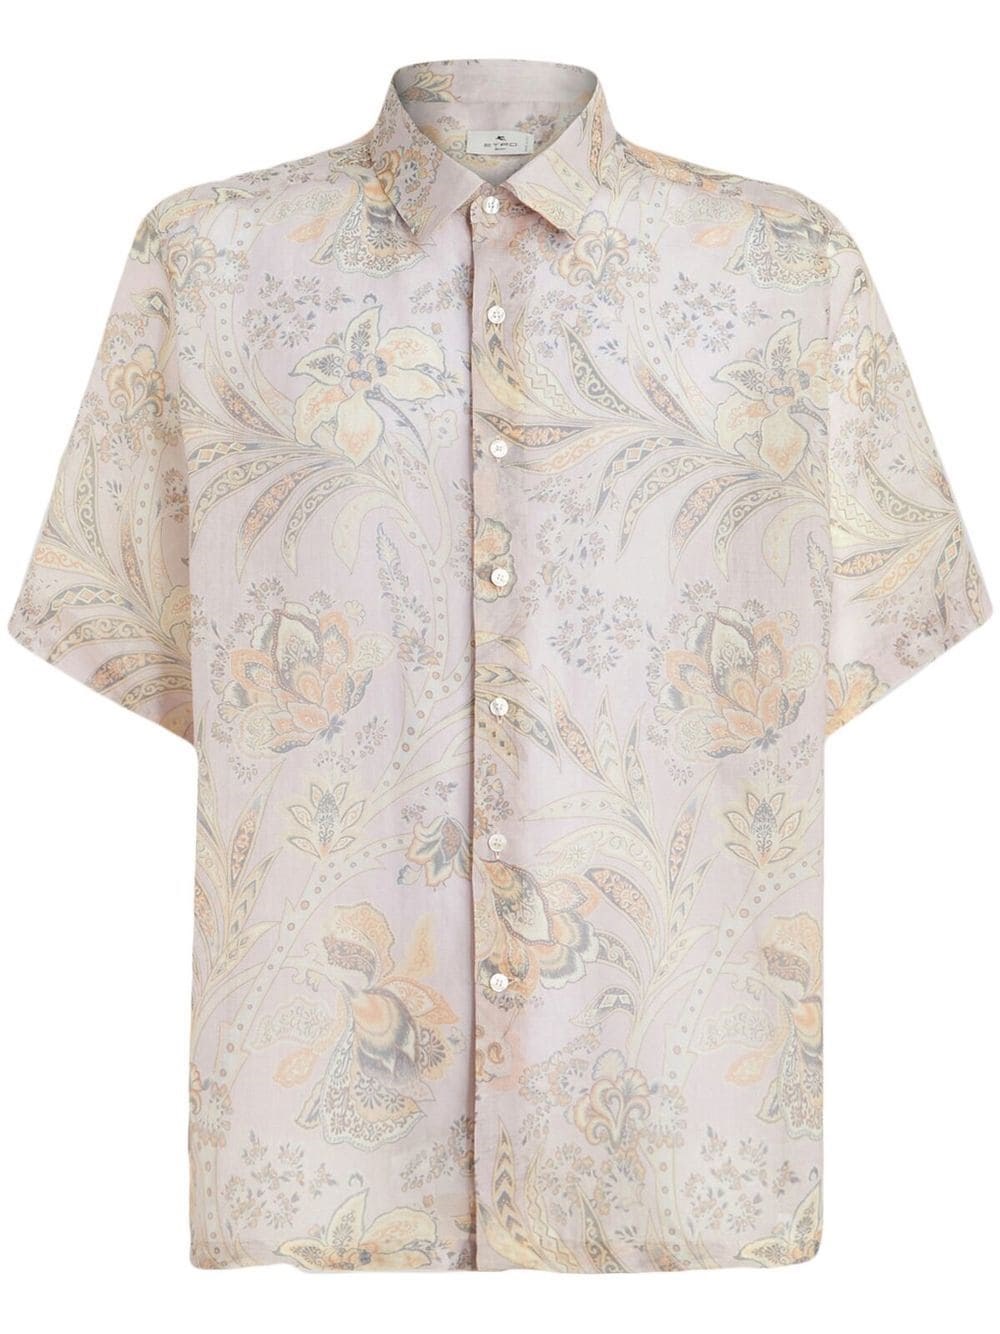 ETRO SHORT-SLEEVED COAT WITH FLORAL PRINT